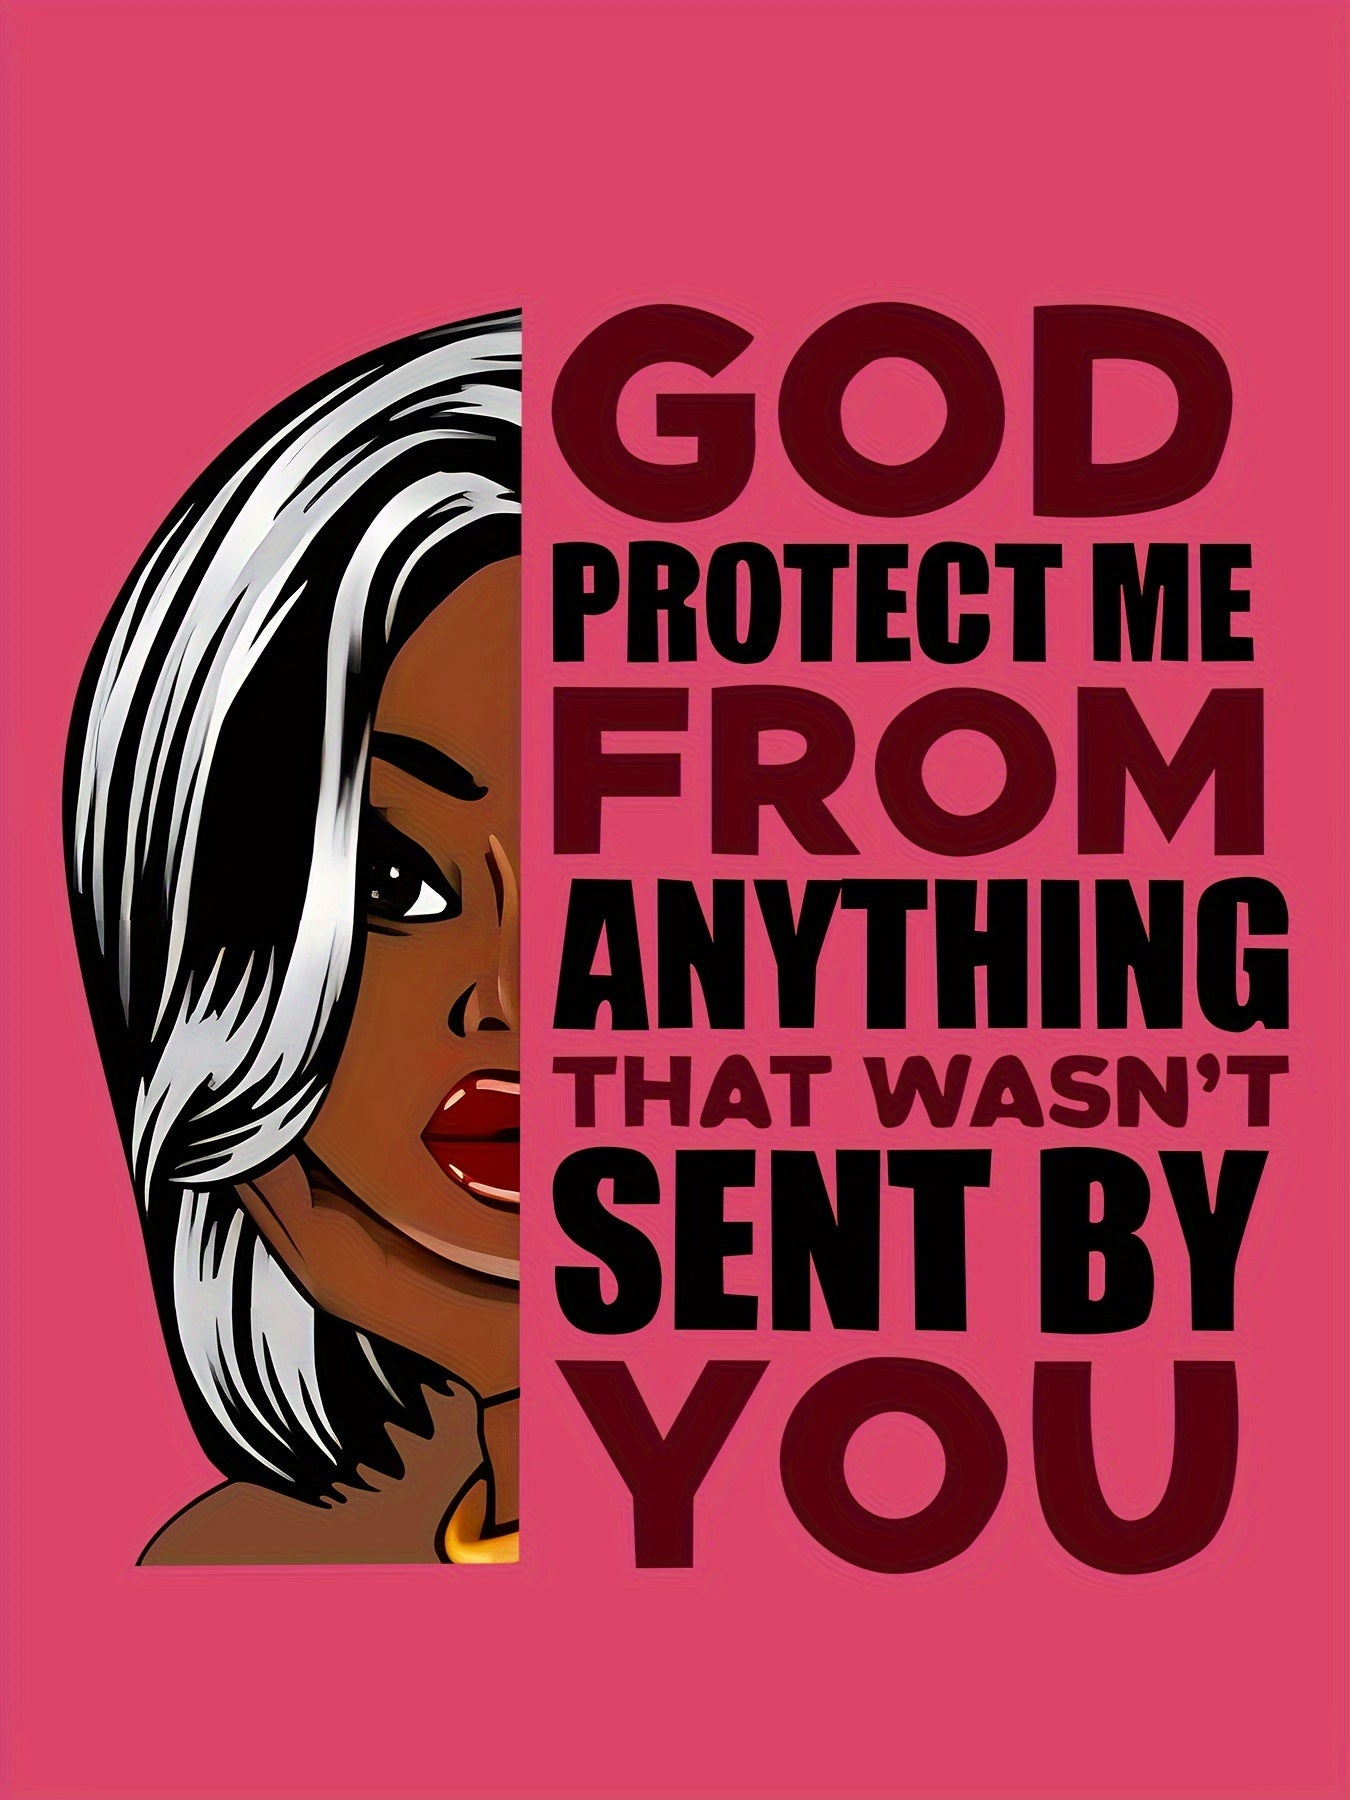 God Protect Me From Anything That Is Not Sent By You Youth Christian Casual Outfit claimedbygoddesigns